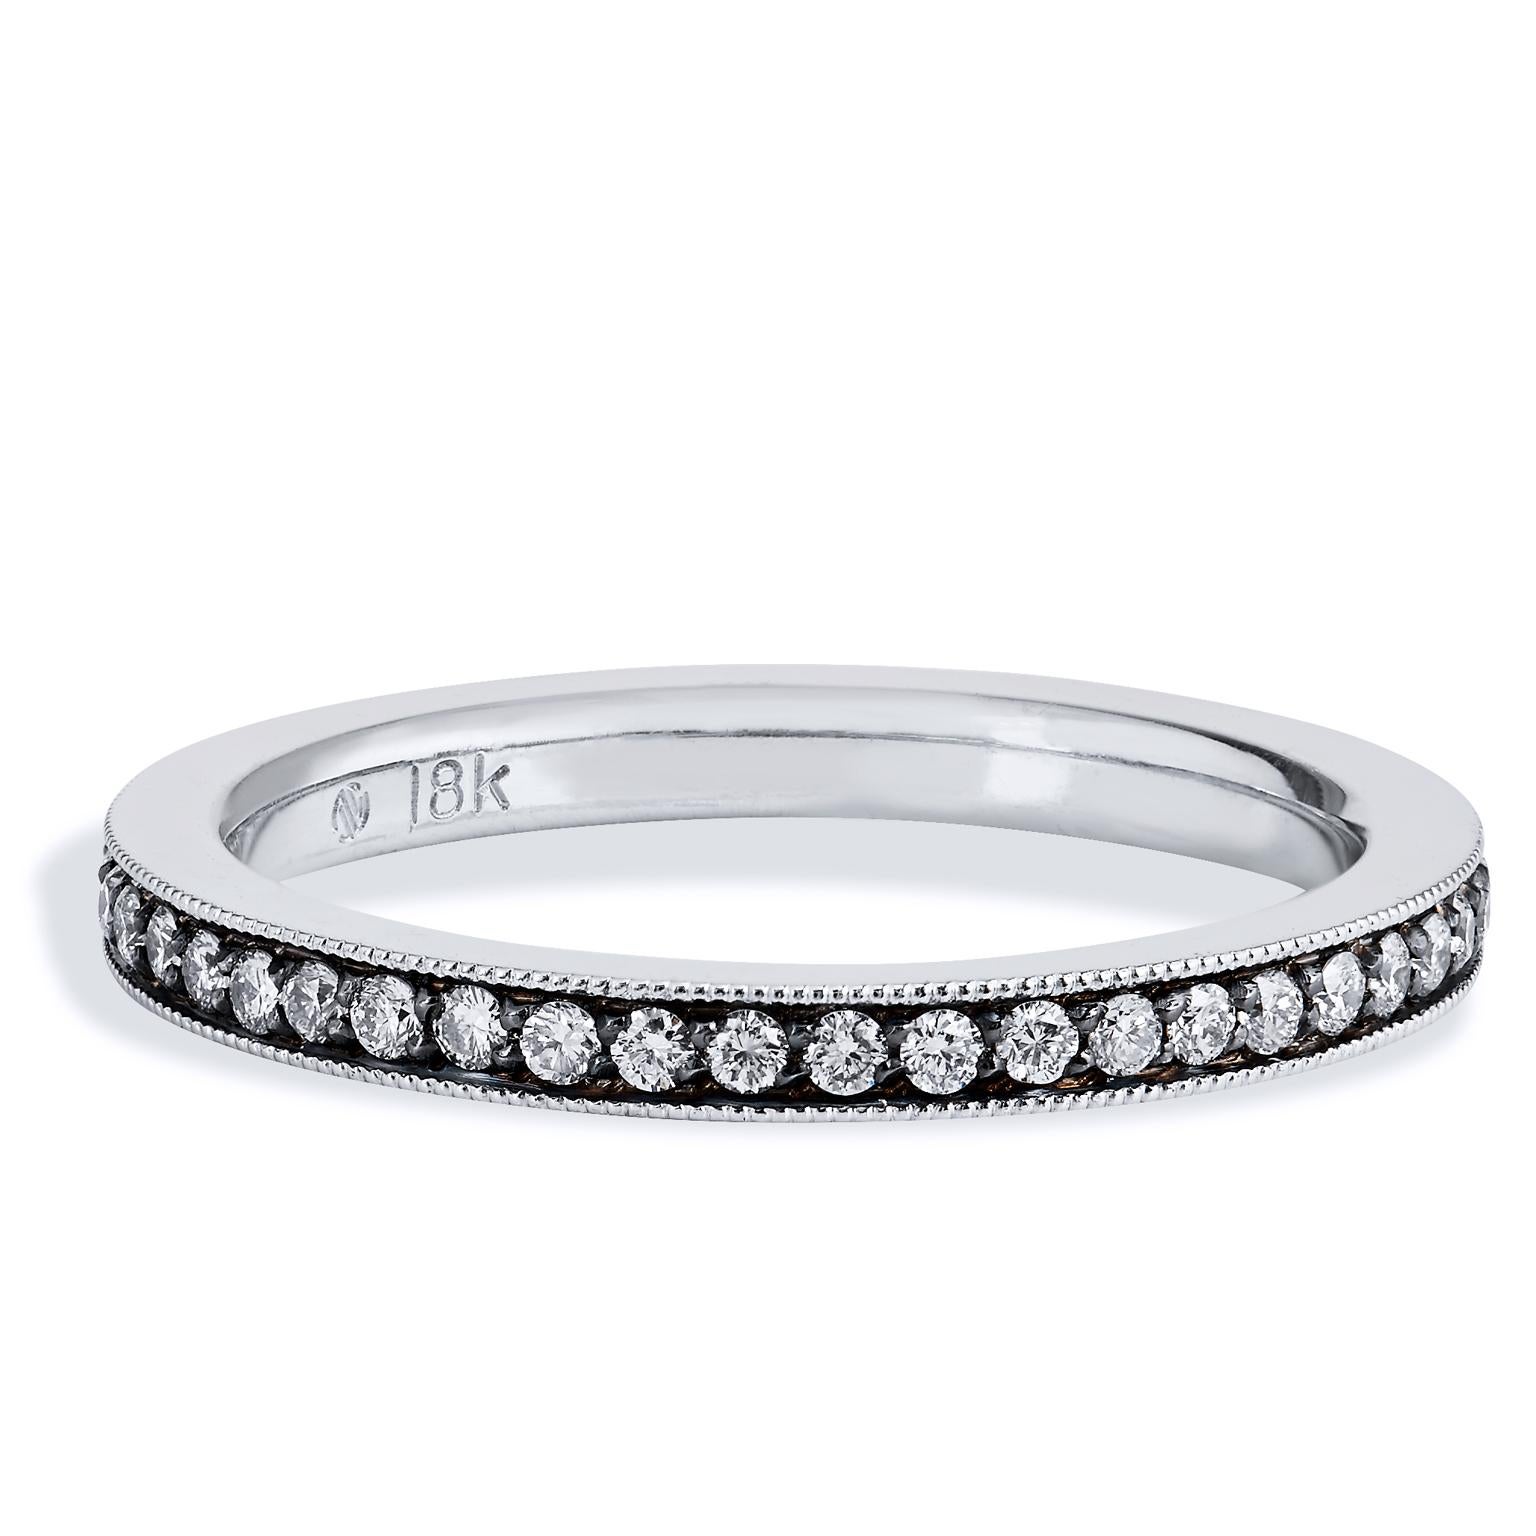 Brilliant Cut Diamond Eternity Band Ring White Gold with Black Rhodium 0.31 Carat 5 For Sale